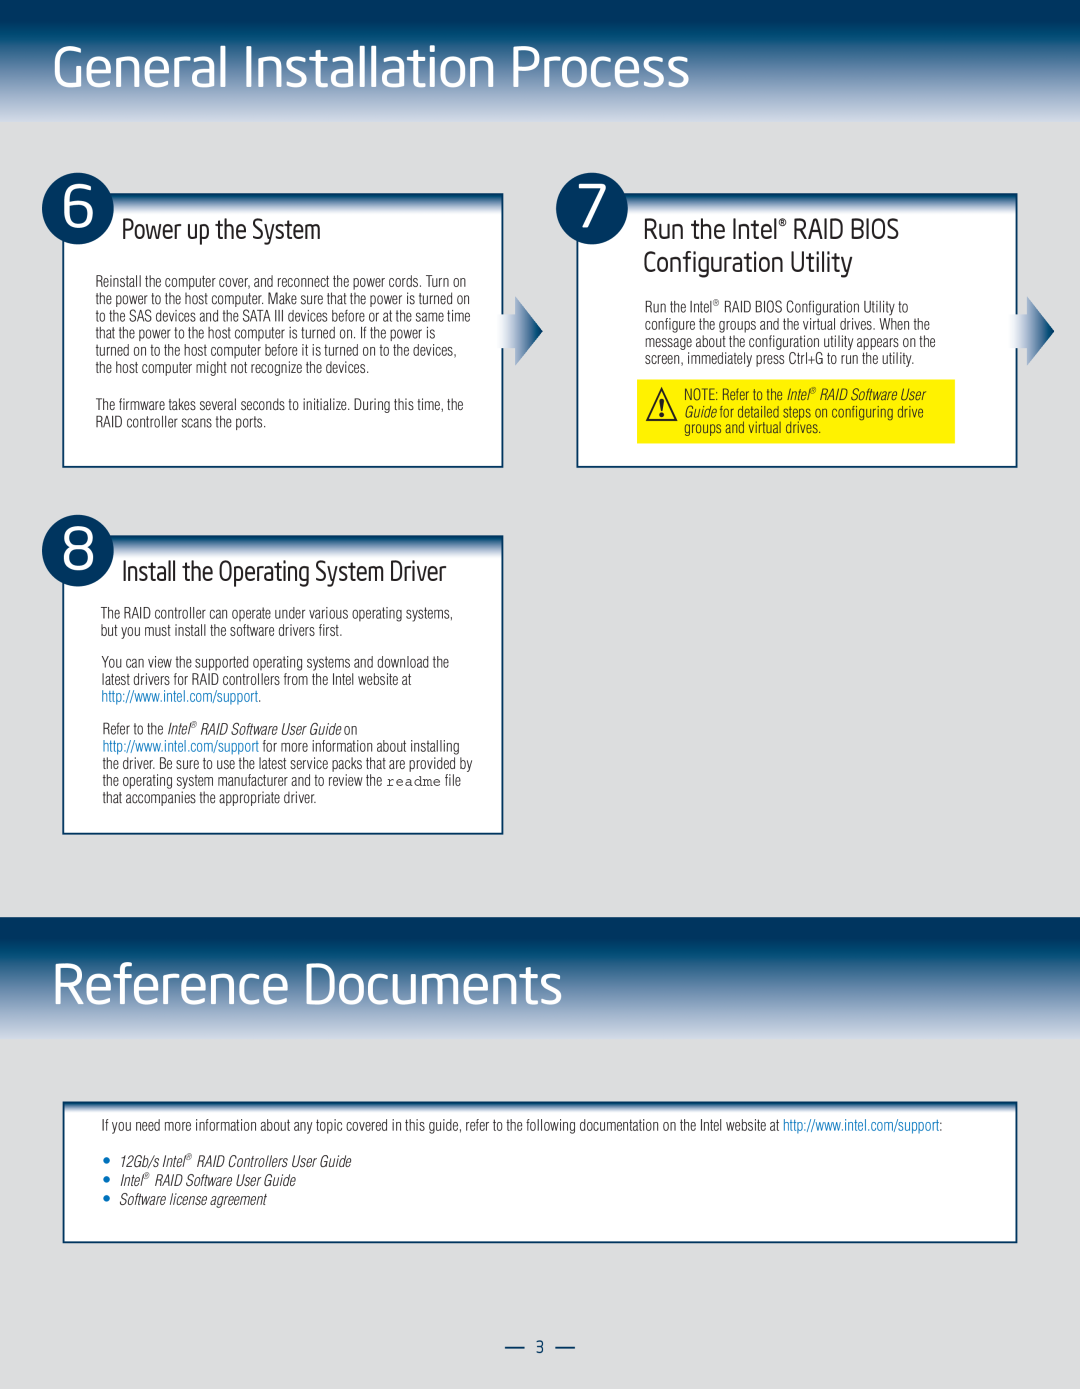 Intel RS3DC080 manual Reference Documents, Power up the System, Run the Intel RAID BIOS Conﬁguration Utility 